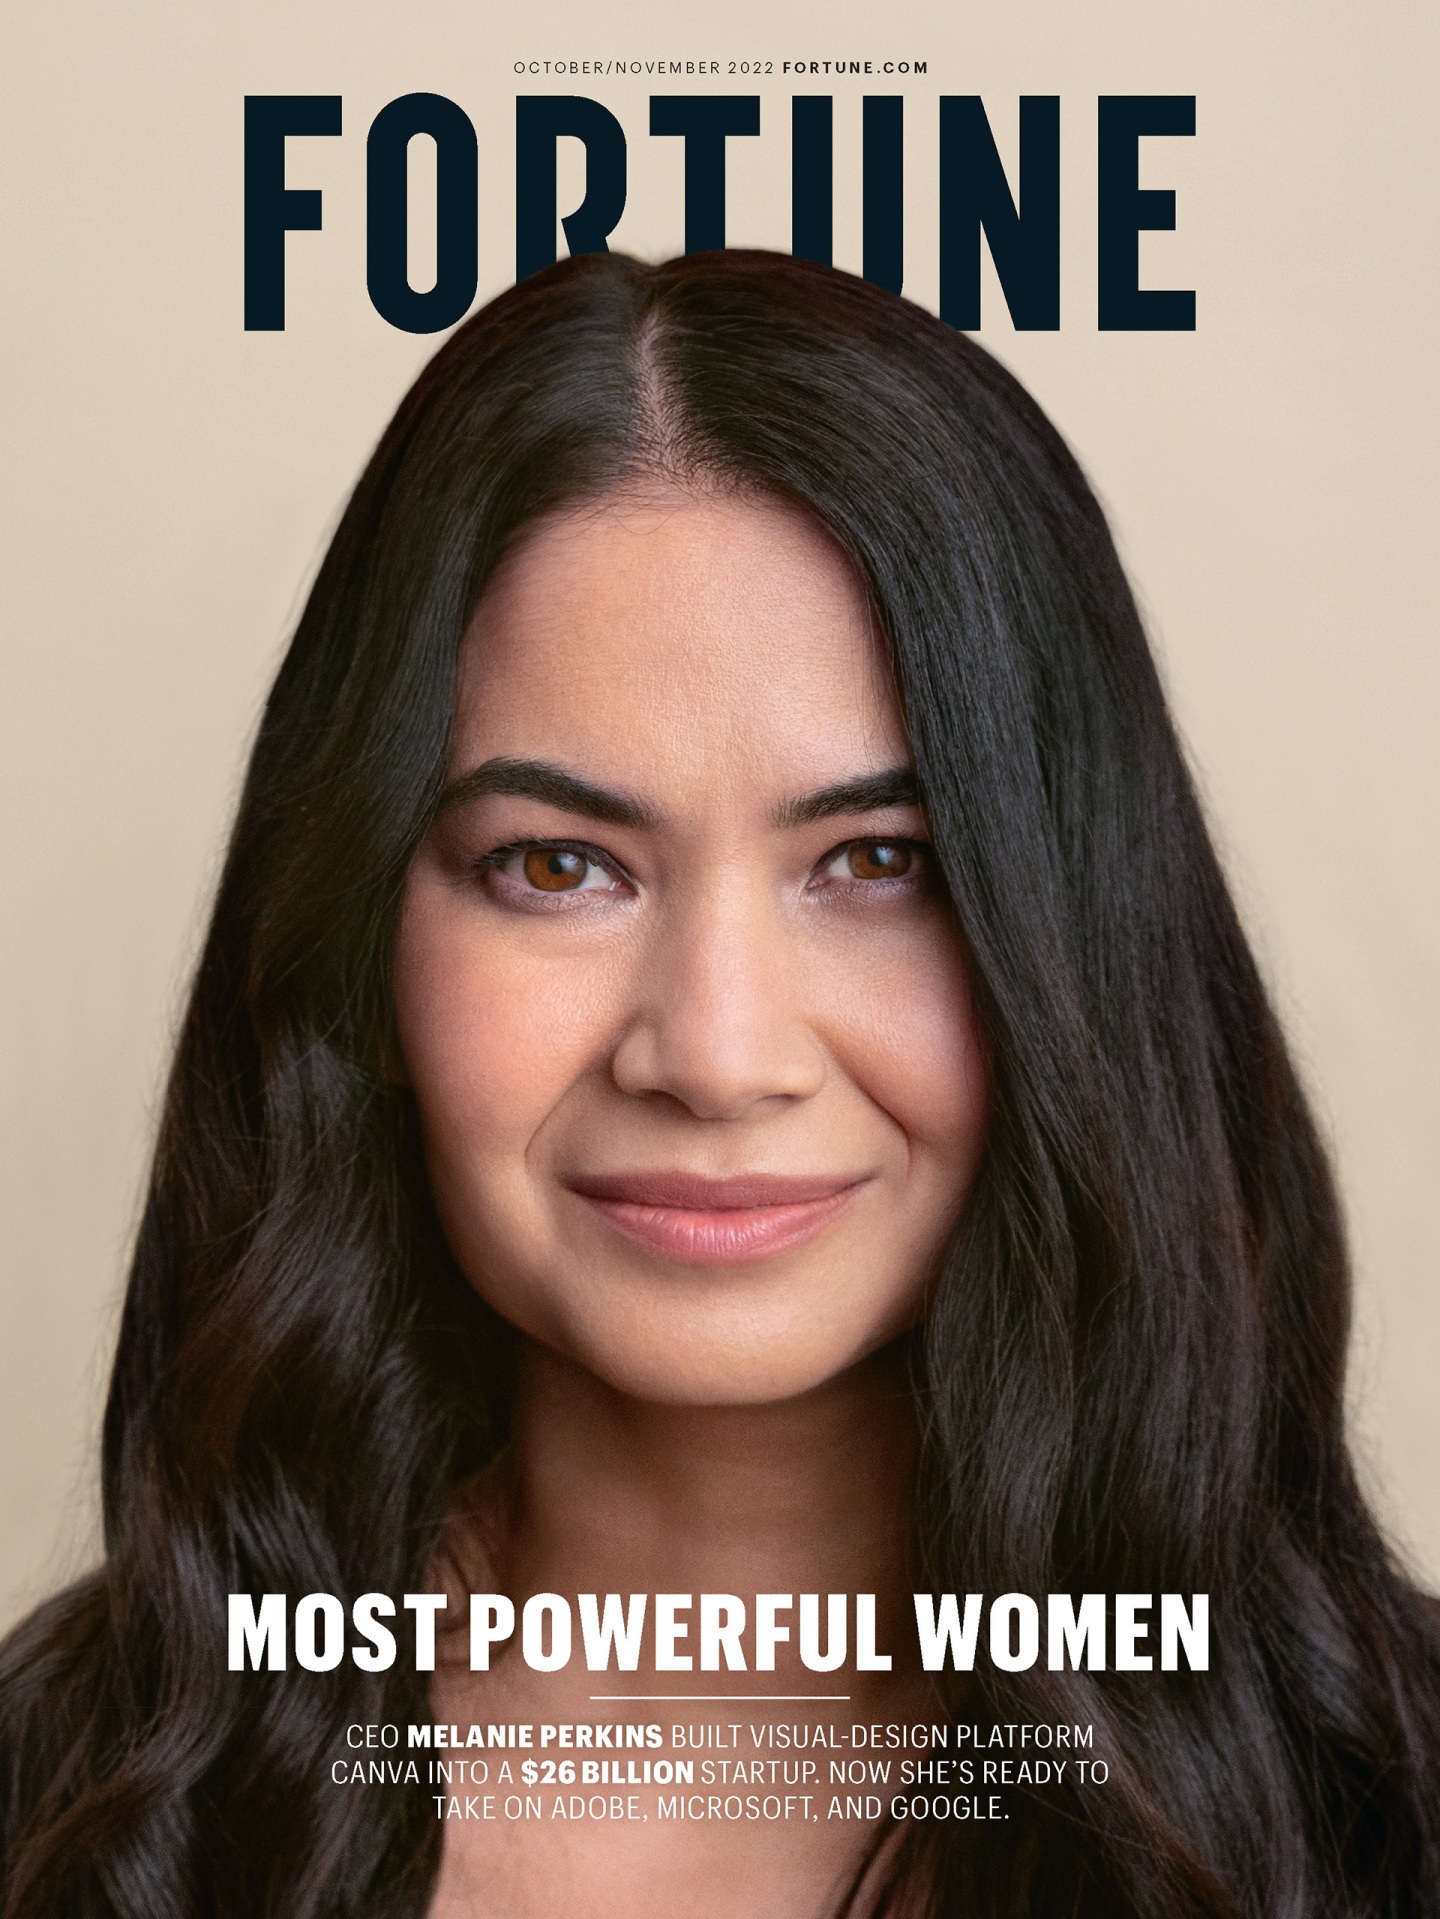 Fortune's October/November 2022 cover with Canva CEO Melanie Perkins.